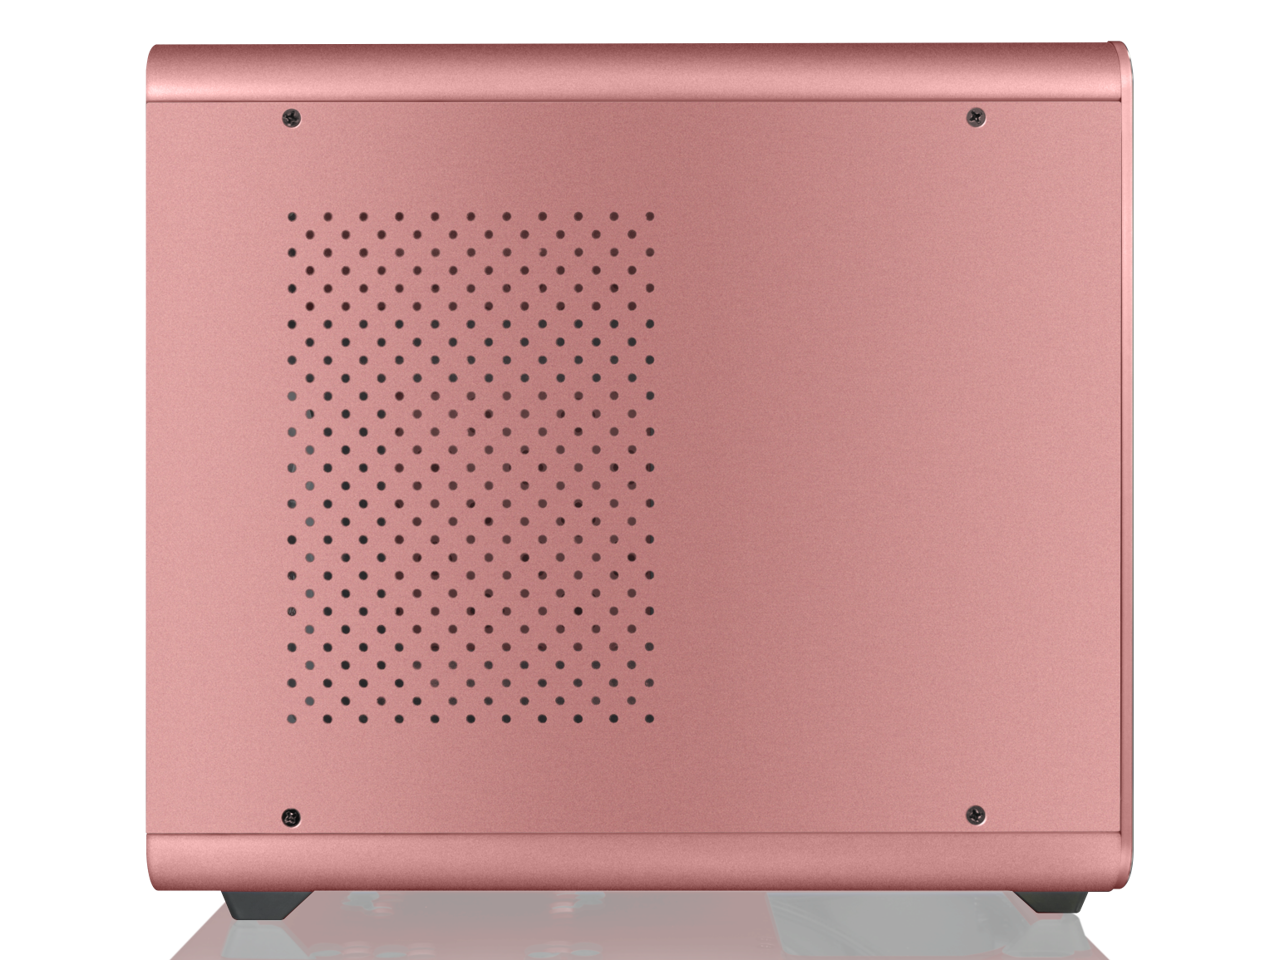 RAIJINTEK METIS PLUS PINK, a Alu. M-ITX Case, is with one 12025 LED fan at rear, USB 3.0* 2, Ventilate holes at top, Compatible with Standard ATX PSU, 170mm VGA Card length, 160mm CPU Cooler heigth.